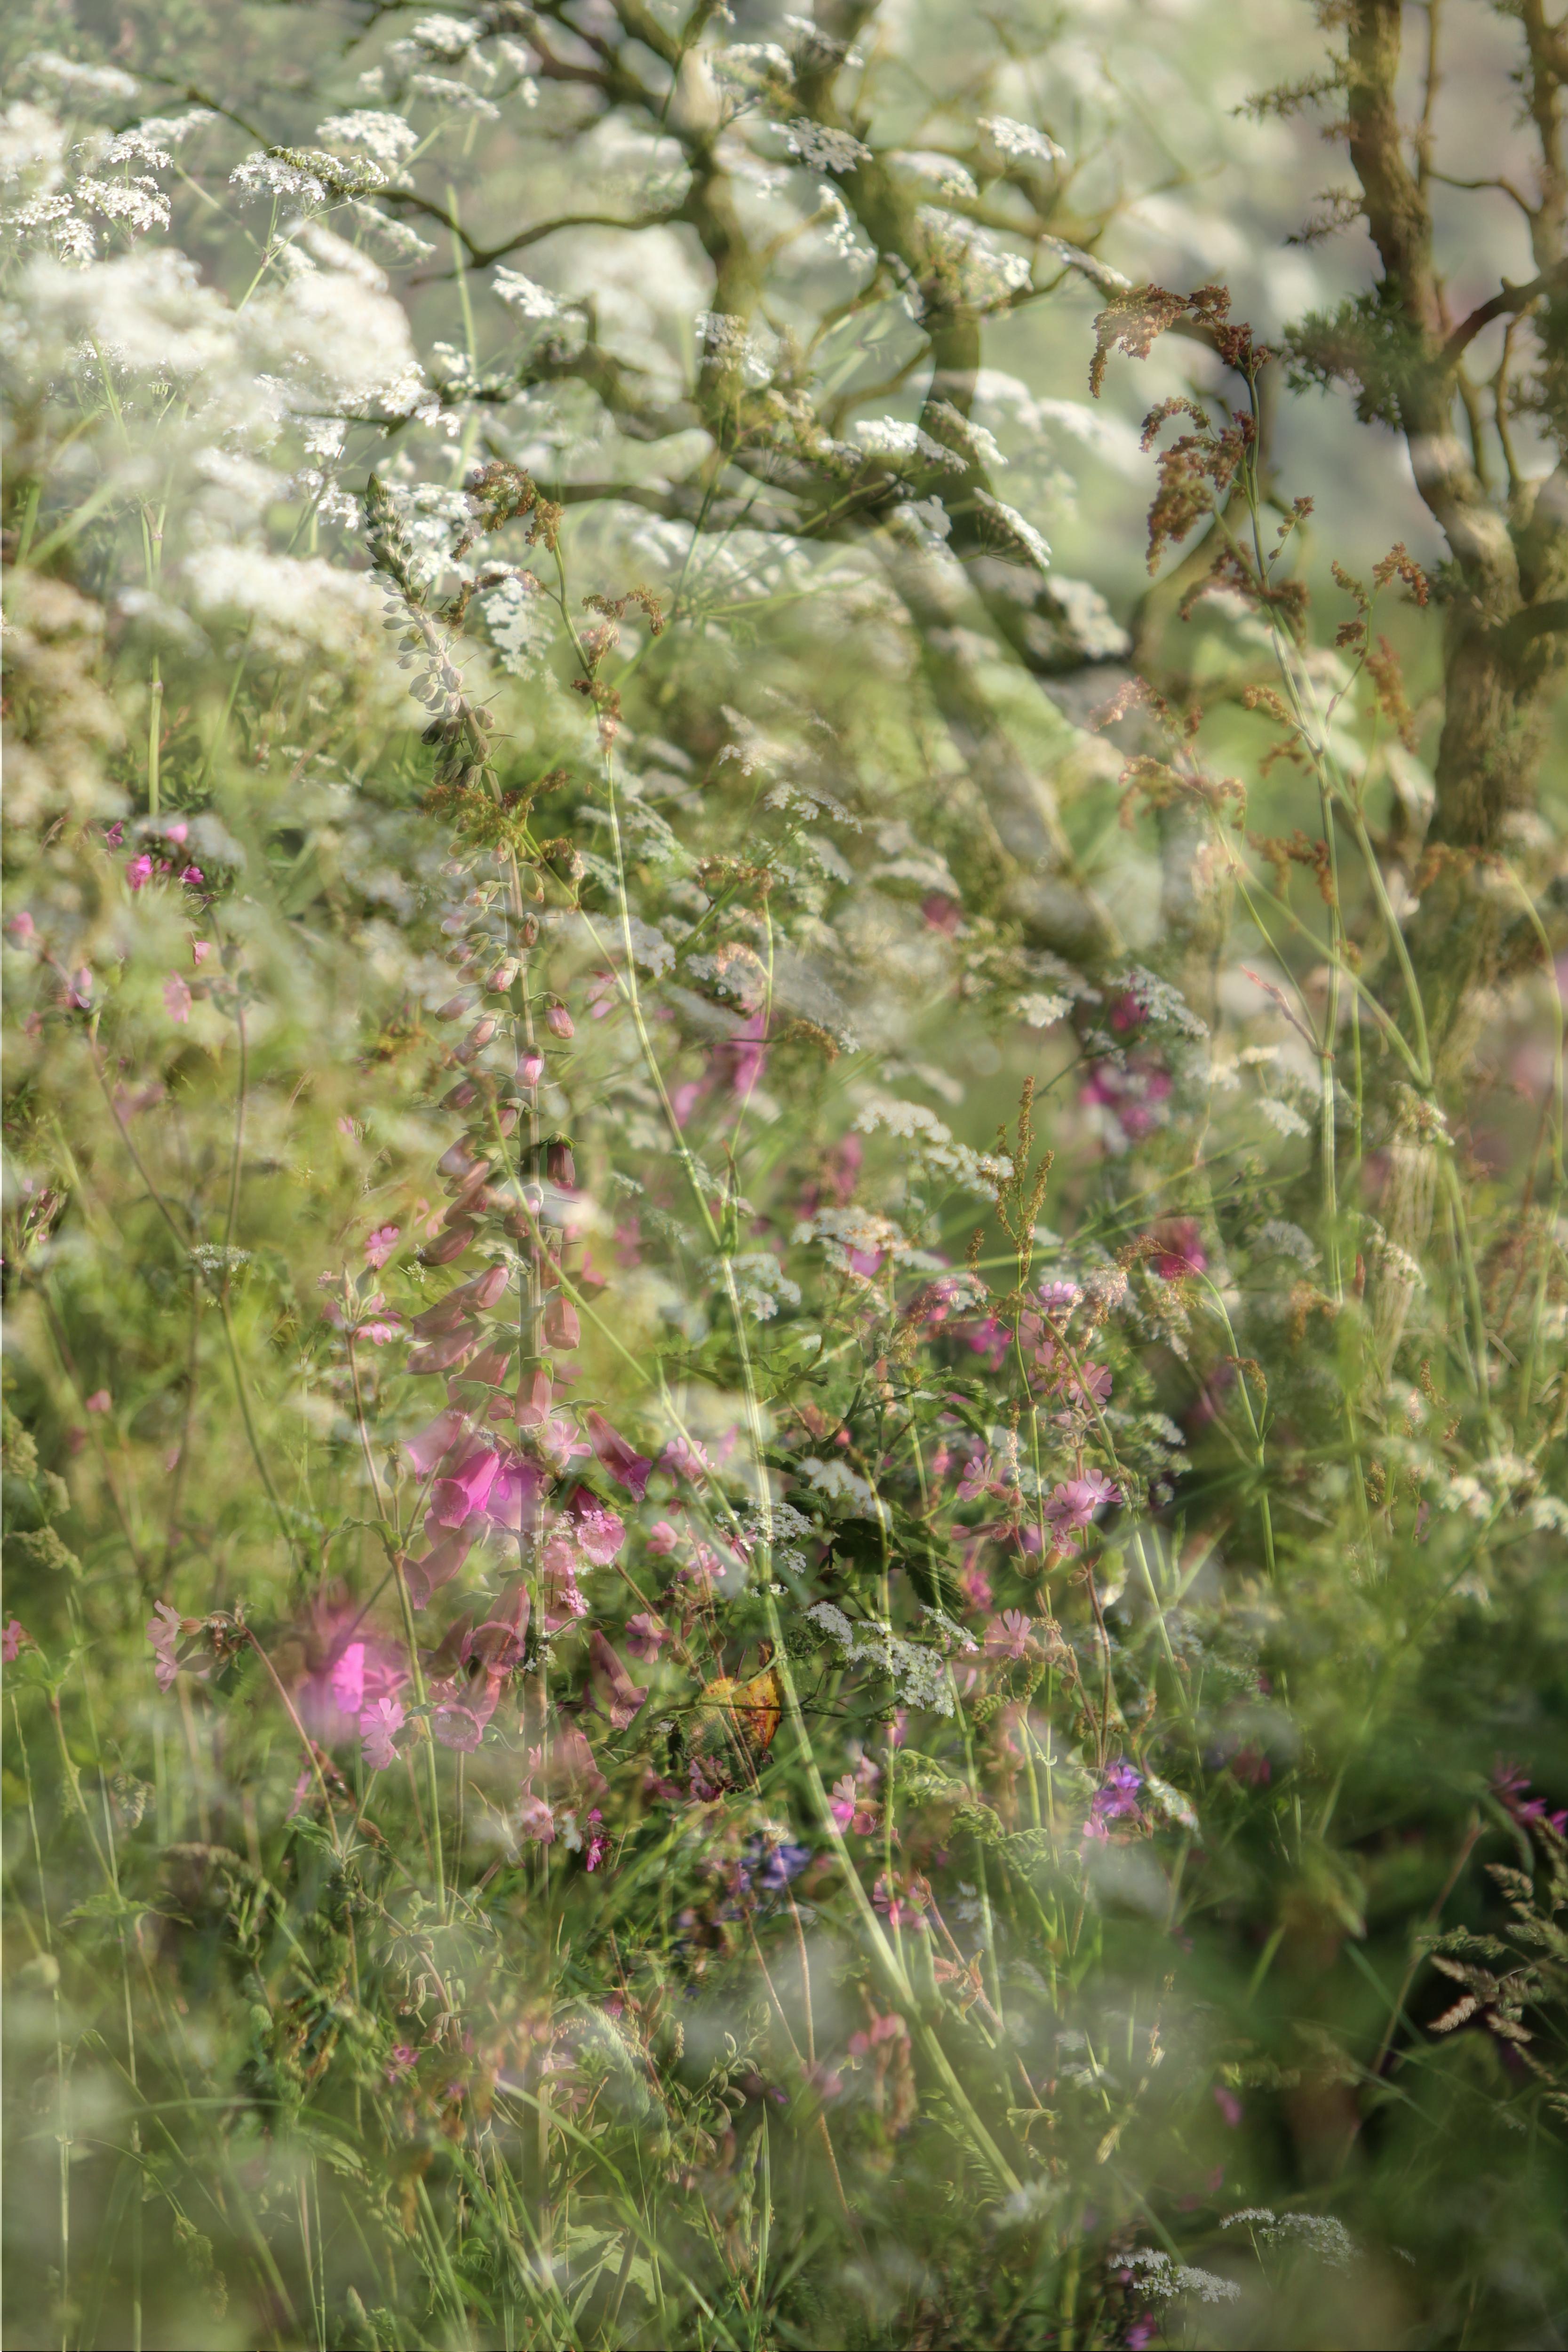 Sophia Milligan Landscape Photograph - 'Youth and the Wise' Contemporary landscape photograph Spring flowers green pink